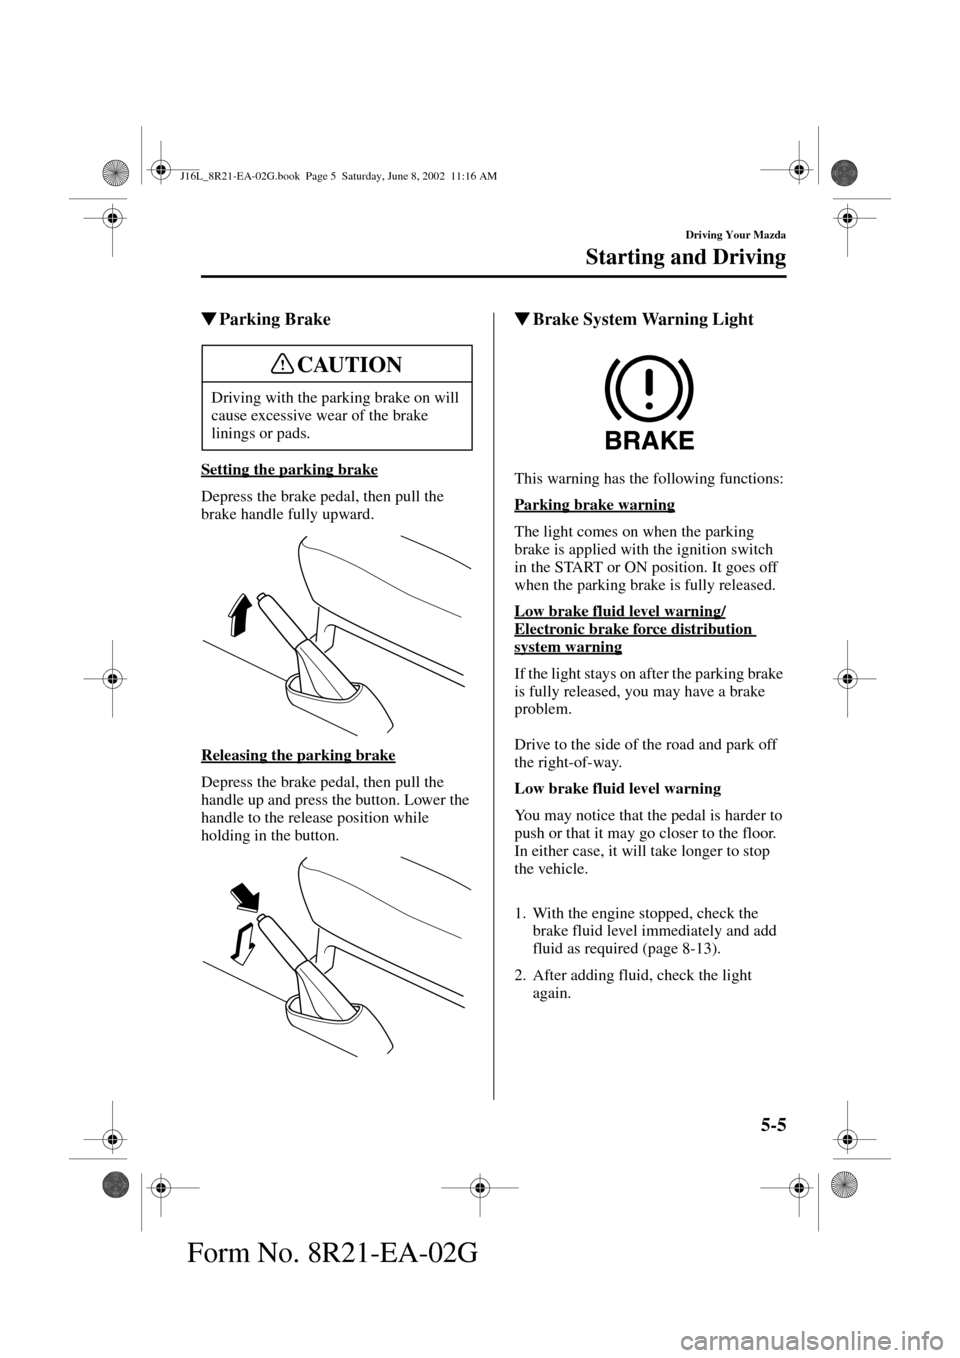 MAZDA MODEL MPV 2003  Owners Manual (in English) 5-5
Driving Your Mazda
Starting and Driving
Form No. 8R21-EA-02G
Parking Brake
Setting the parking brake
Depress the brake pedal, then pull the 
brake handle fully upward.
Releasing the parking brake